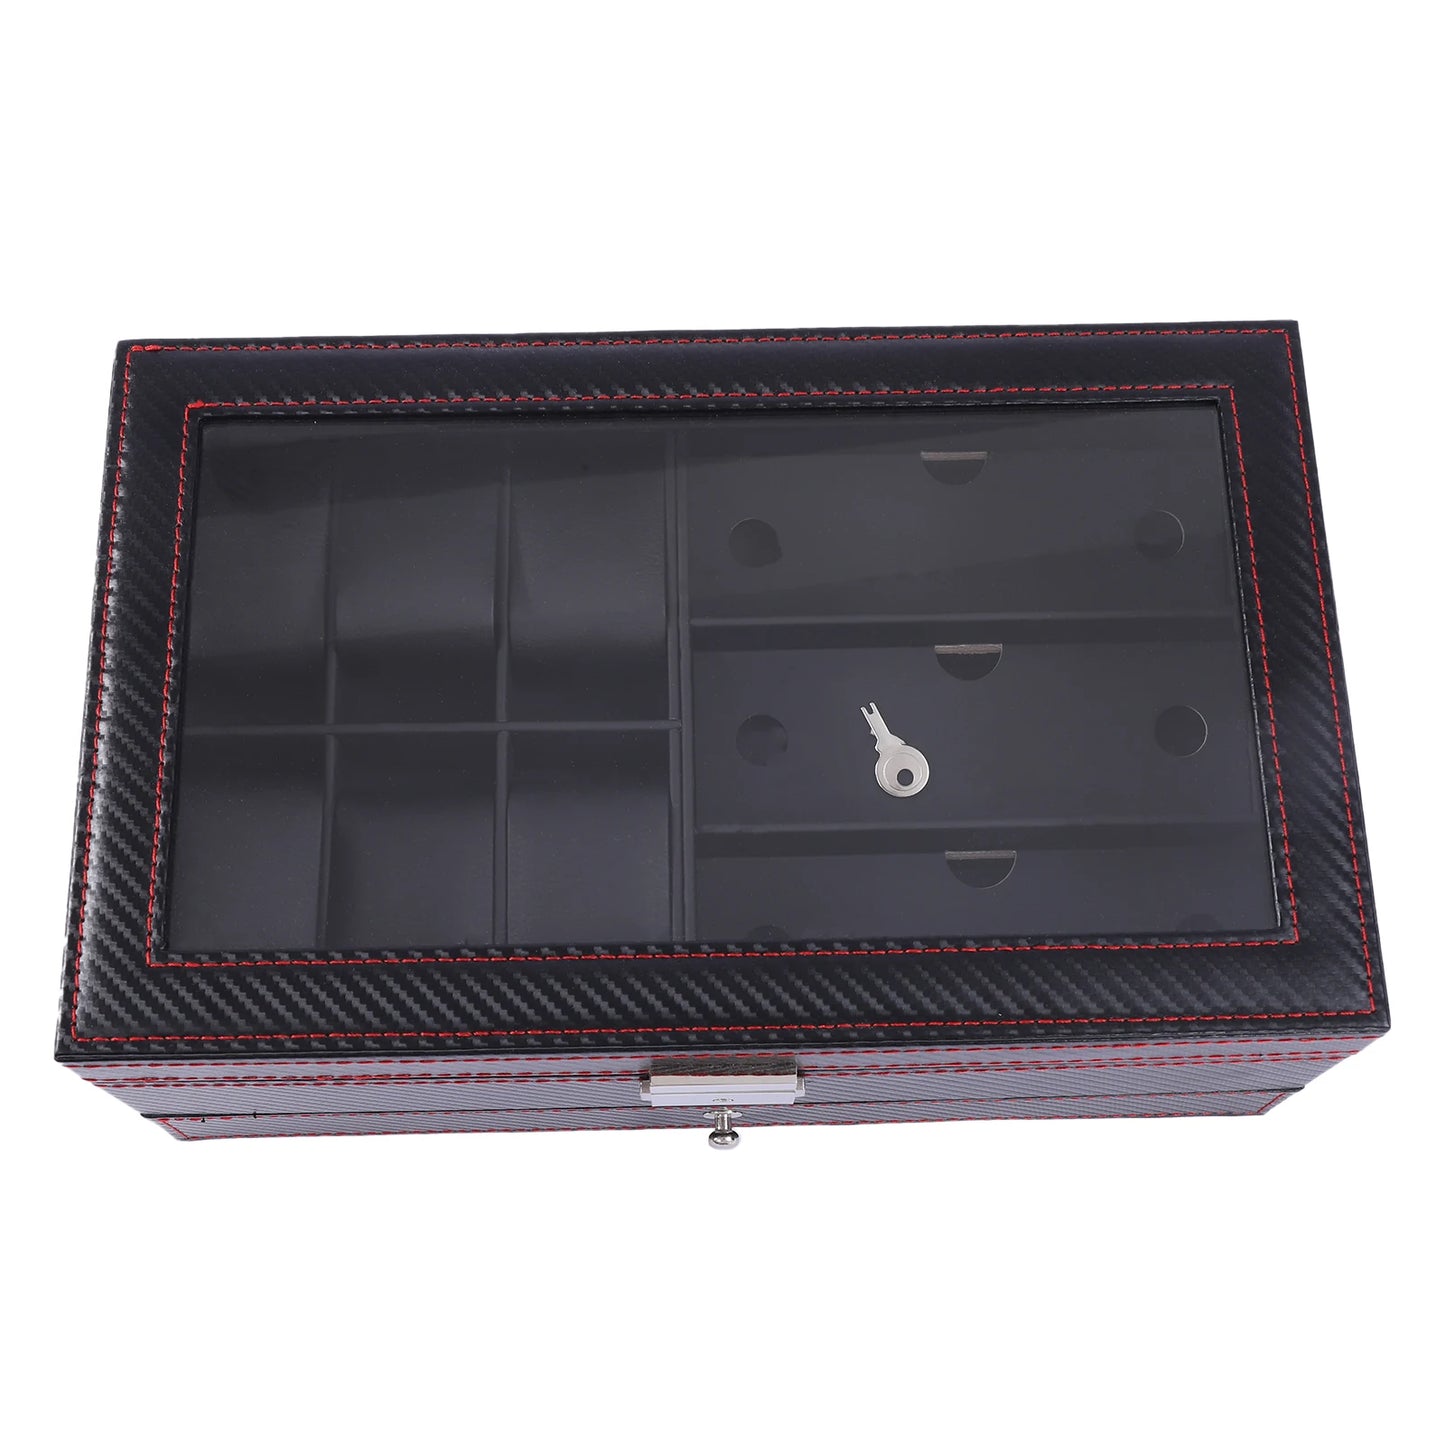 Watch Box for Men Jewelry 6 Watch Holder 3 Glasses Slots Valet Drawer for Rings